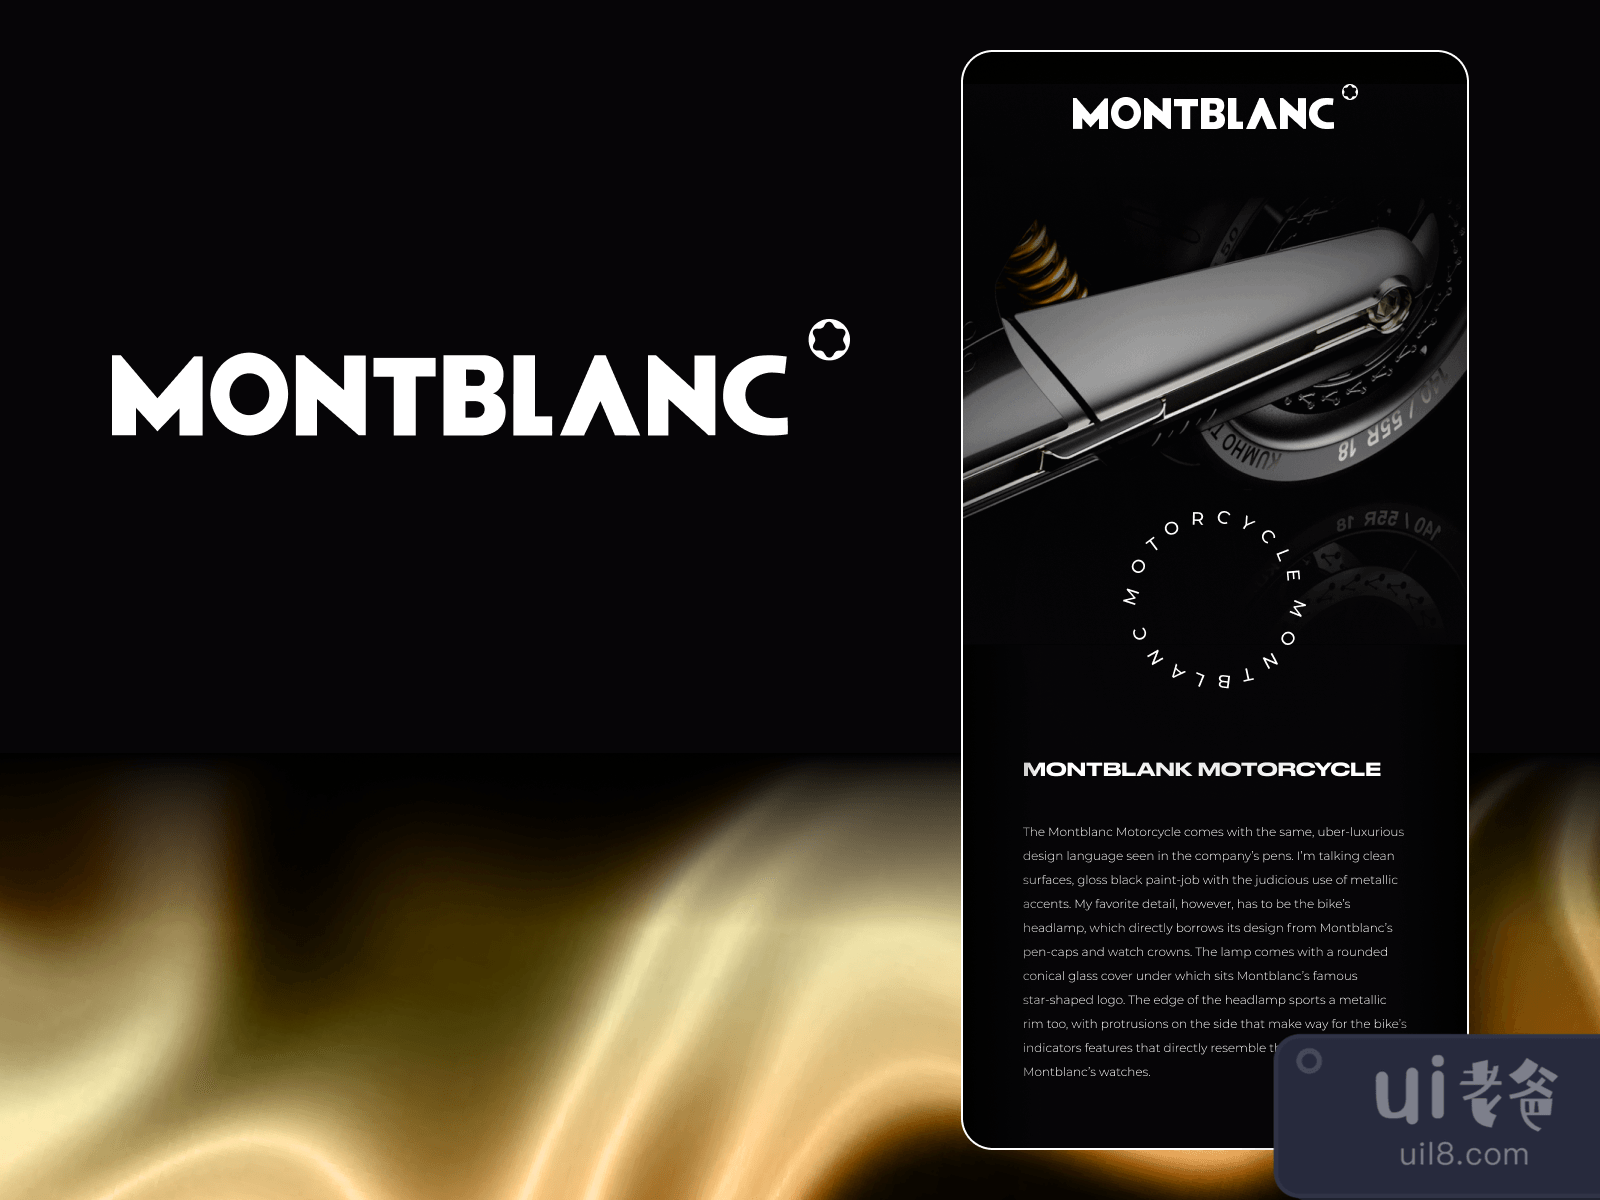 Montblanc  Motorcycle Mobile App for Figma and Adobe XD No 4